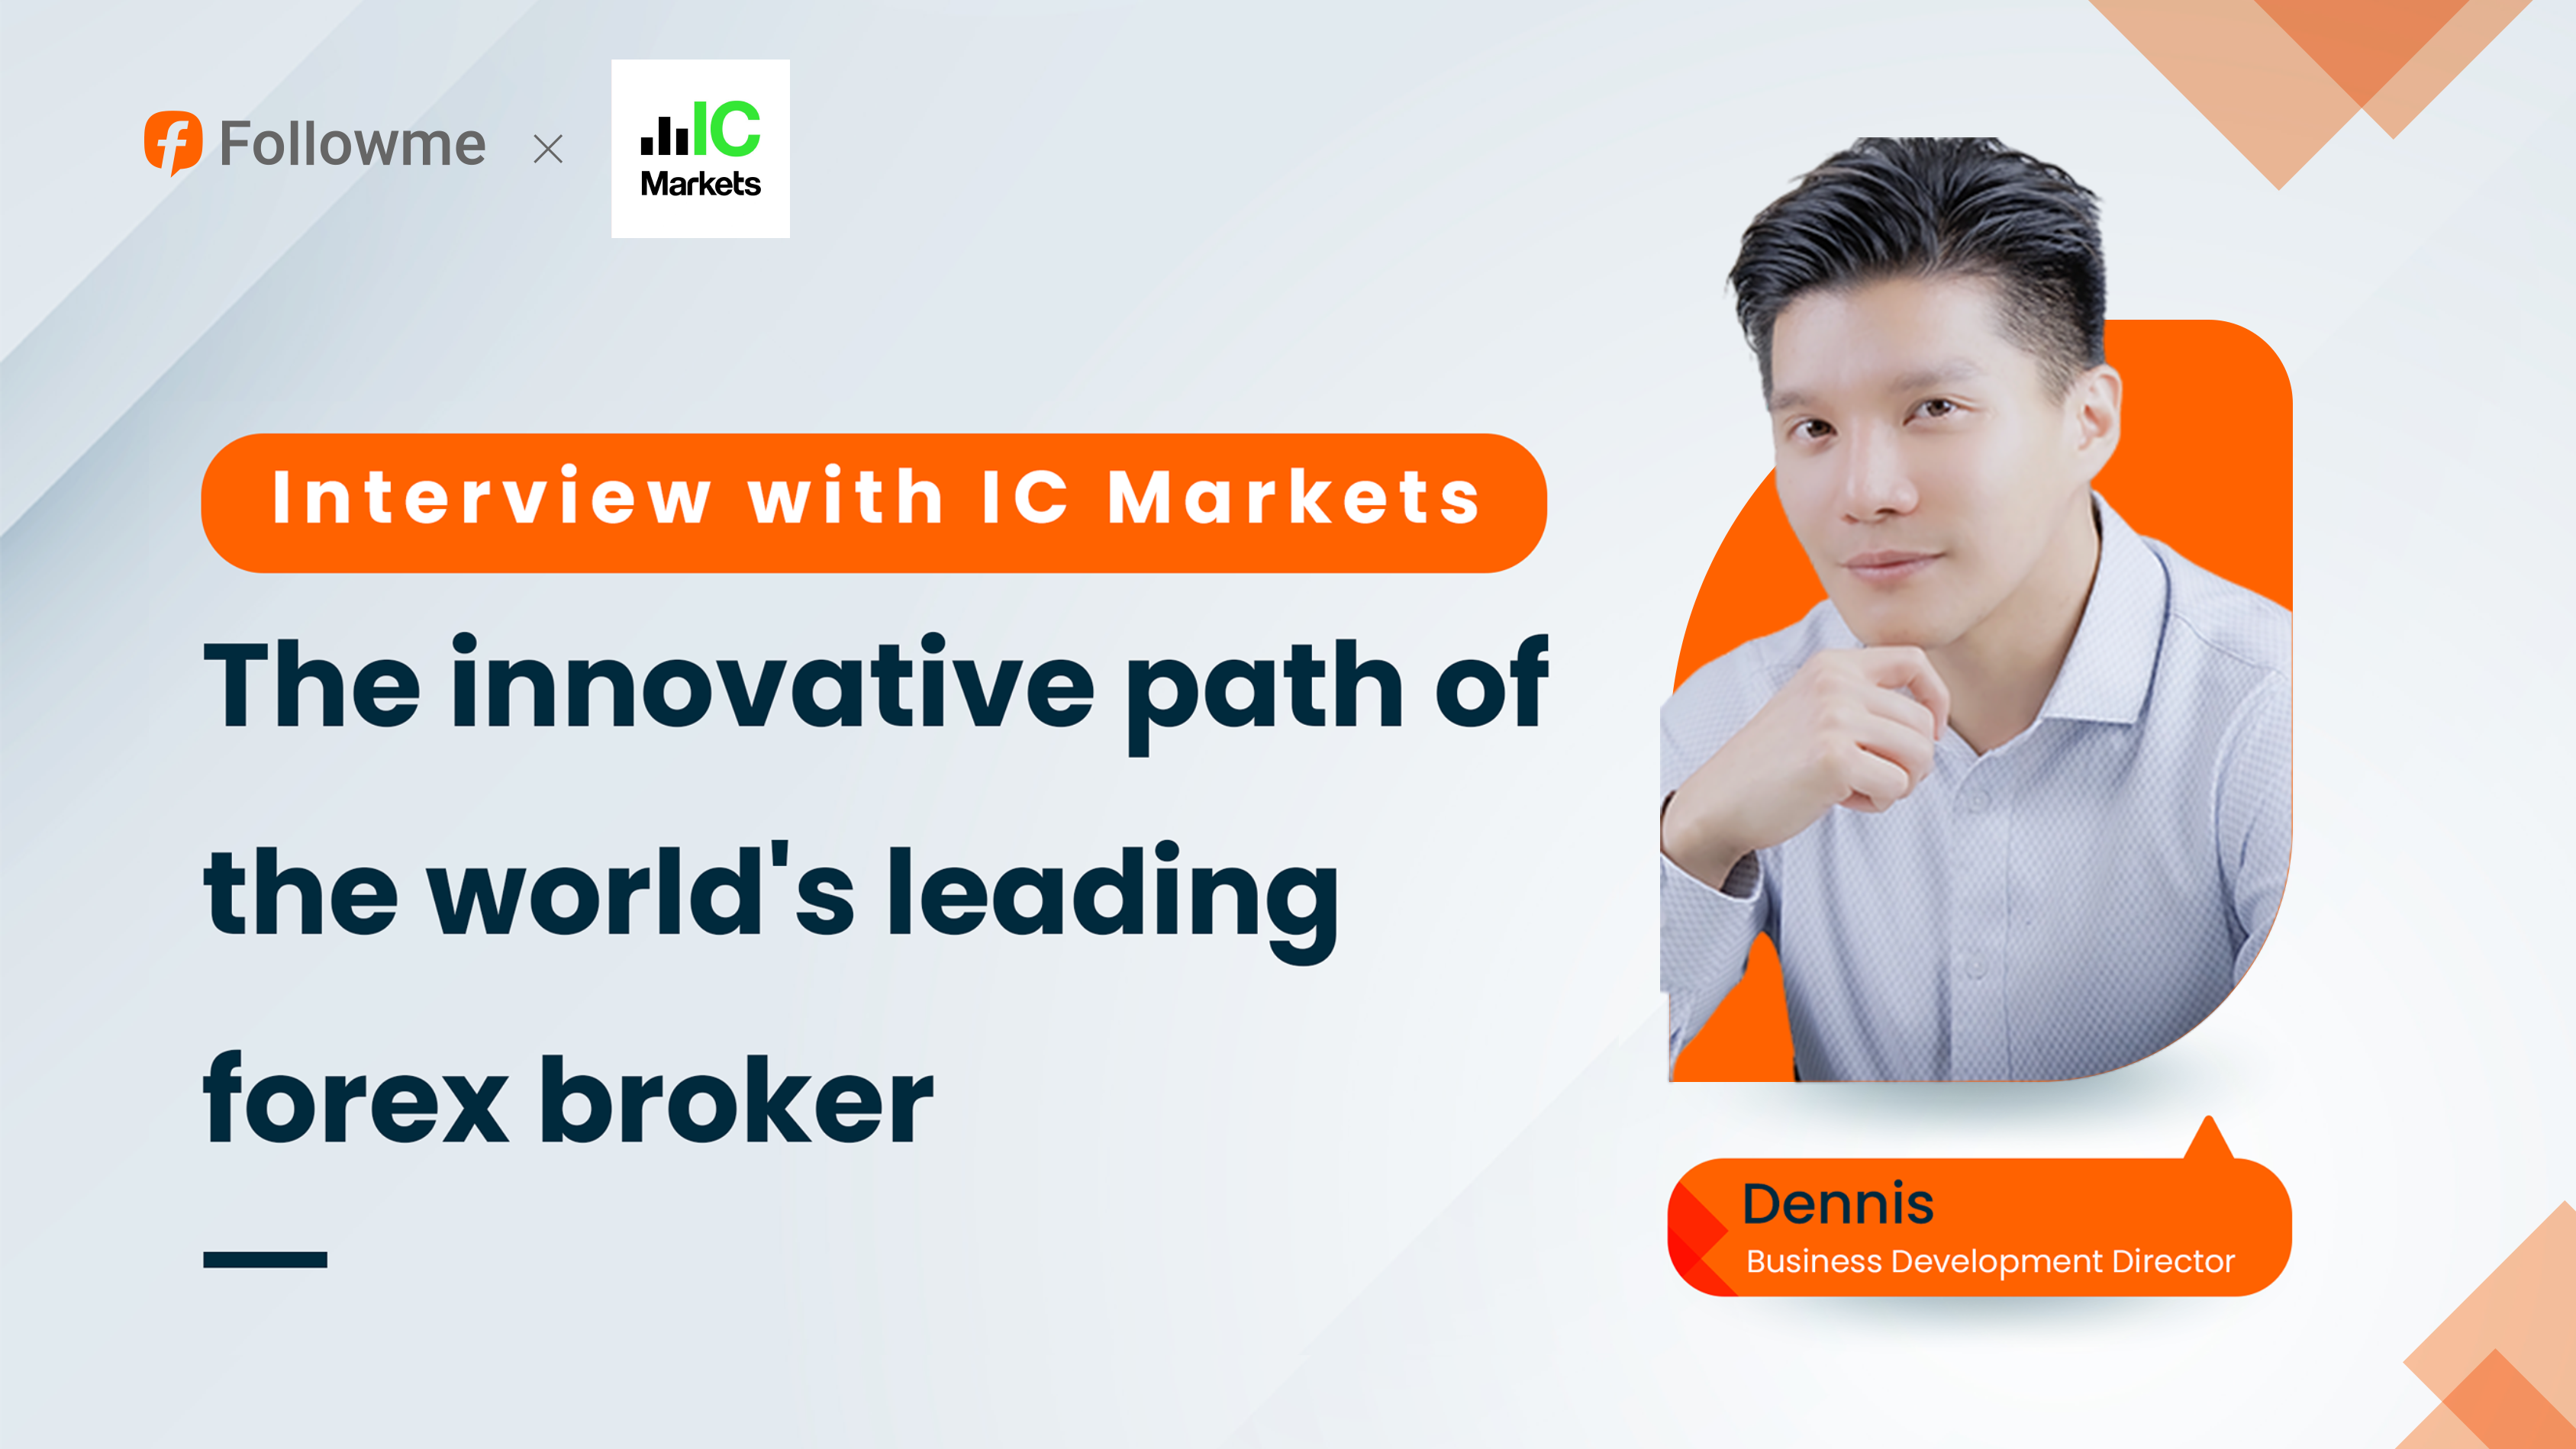 Dialogue with IC Markets: Pioneering the Path of Innovation as the World's Leading Forex Broker